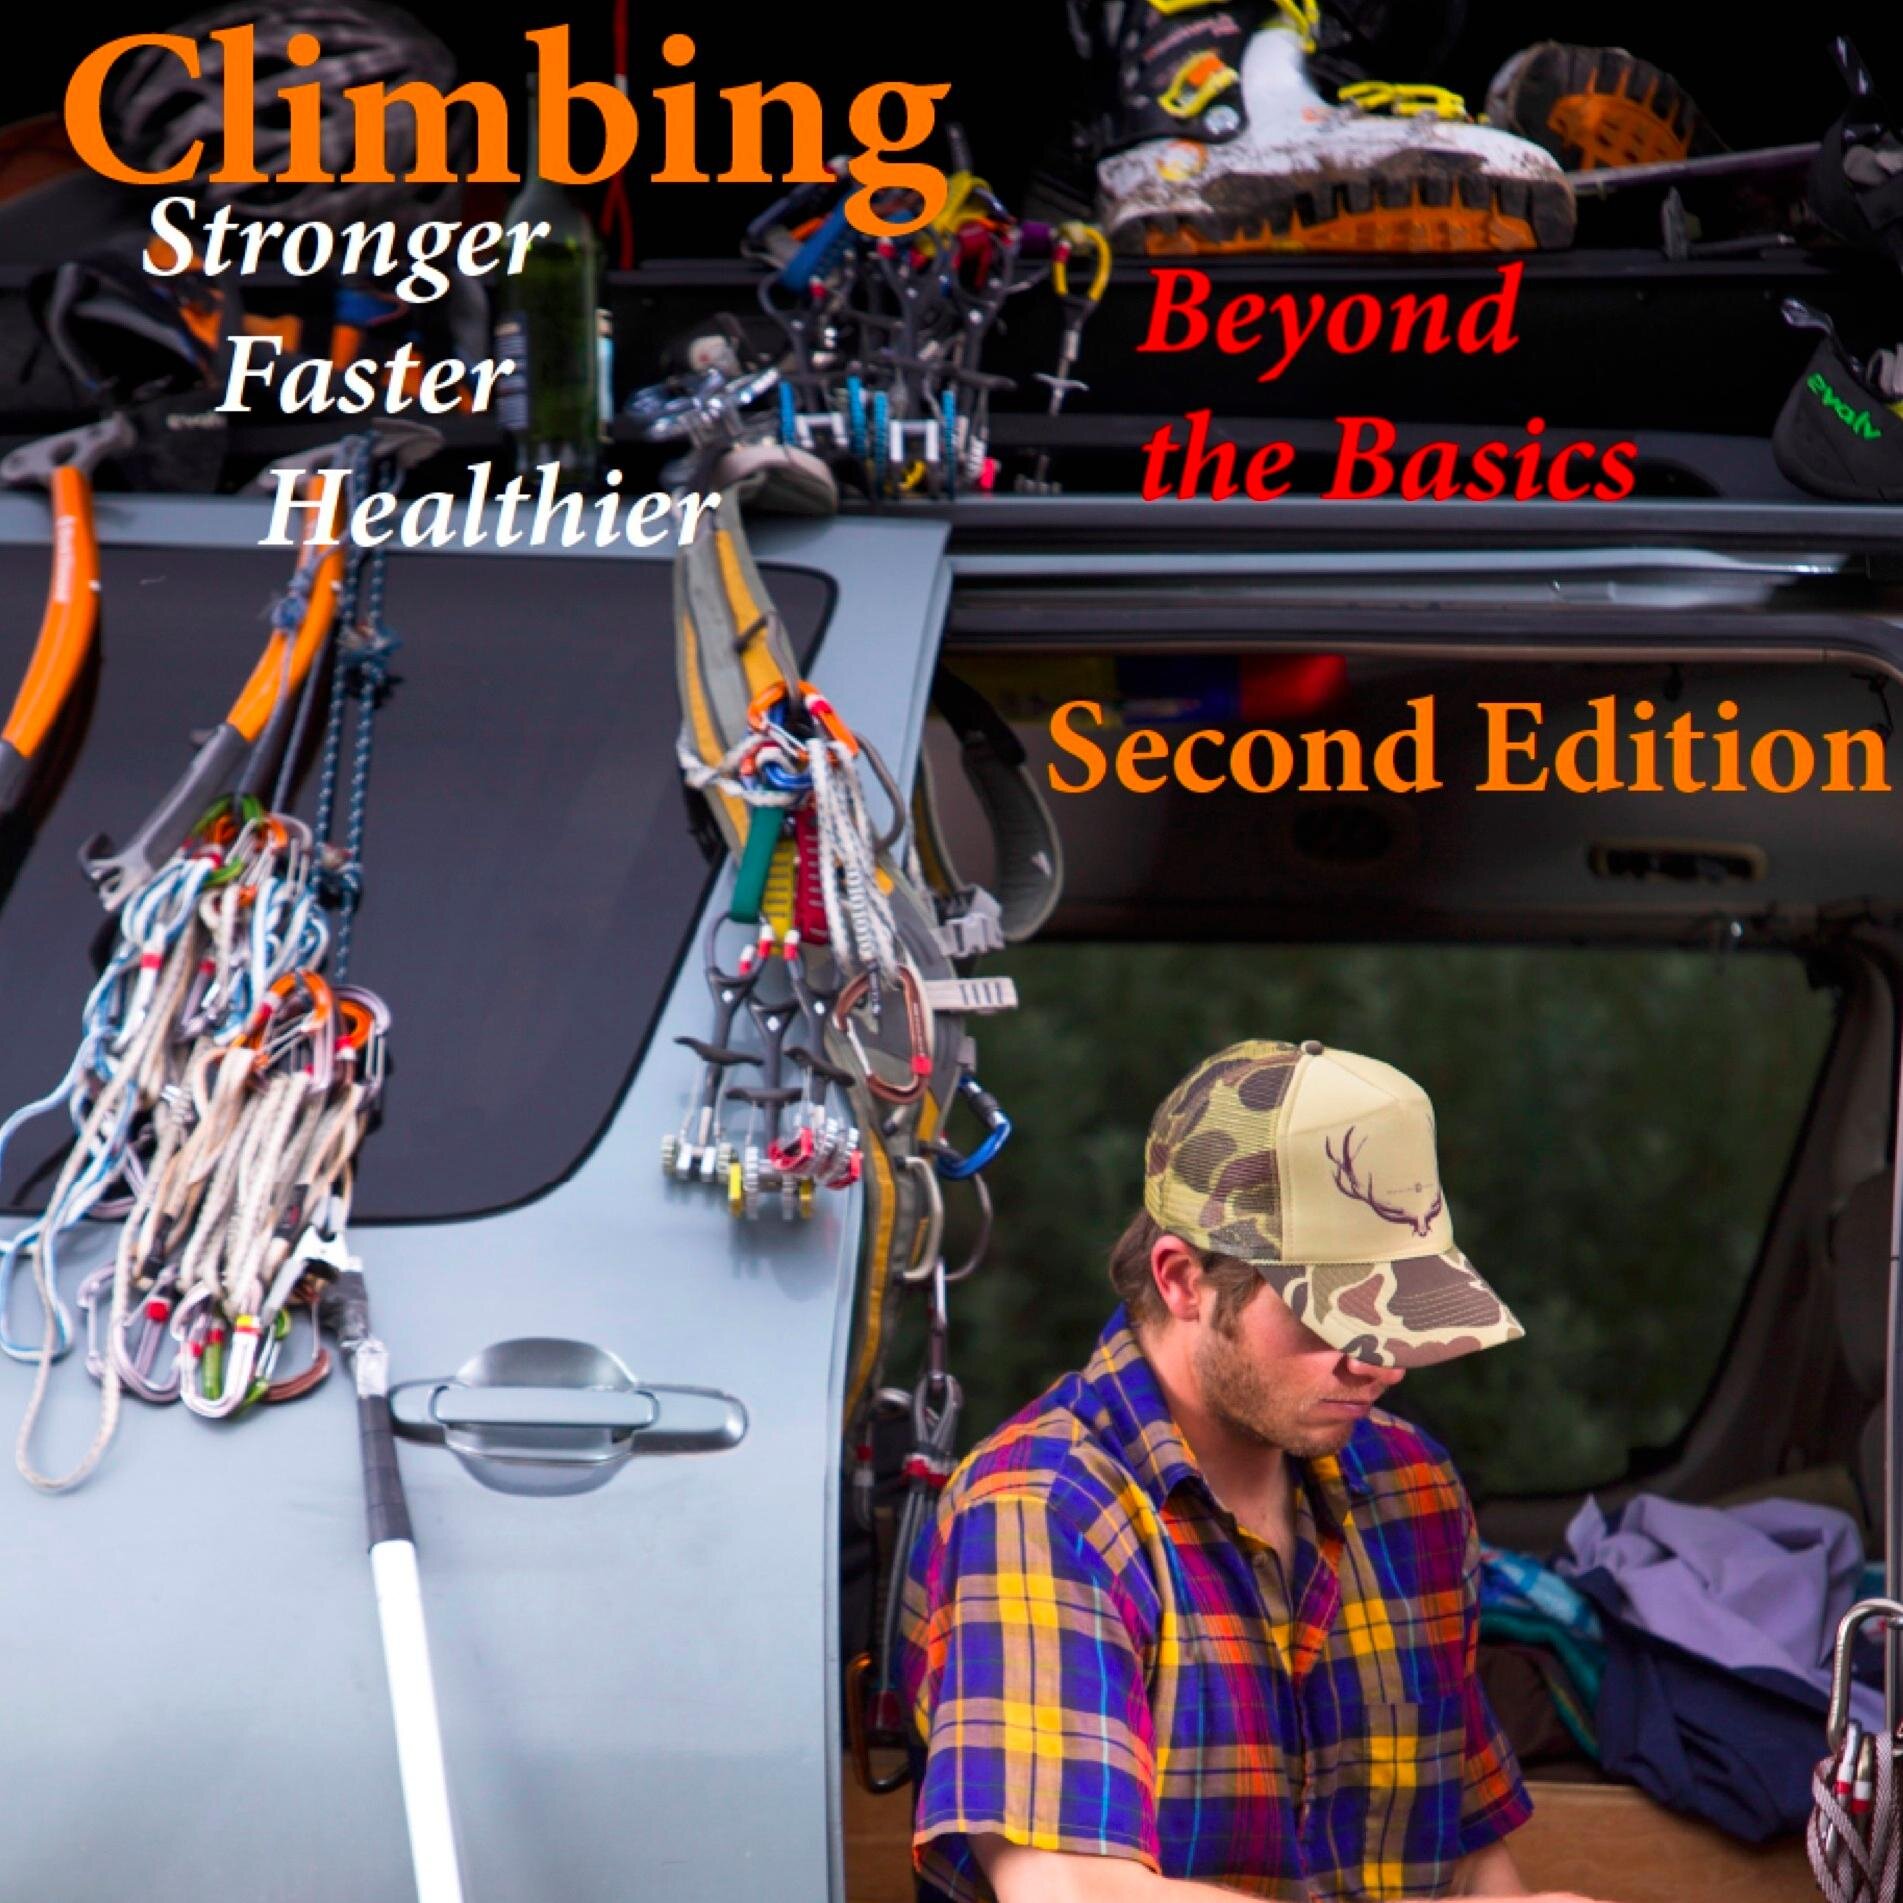 Climbing Stronger, Faster, Healthier: Beyond the Basics. Second Edition. Climbing Omnibus